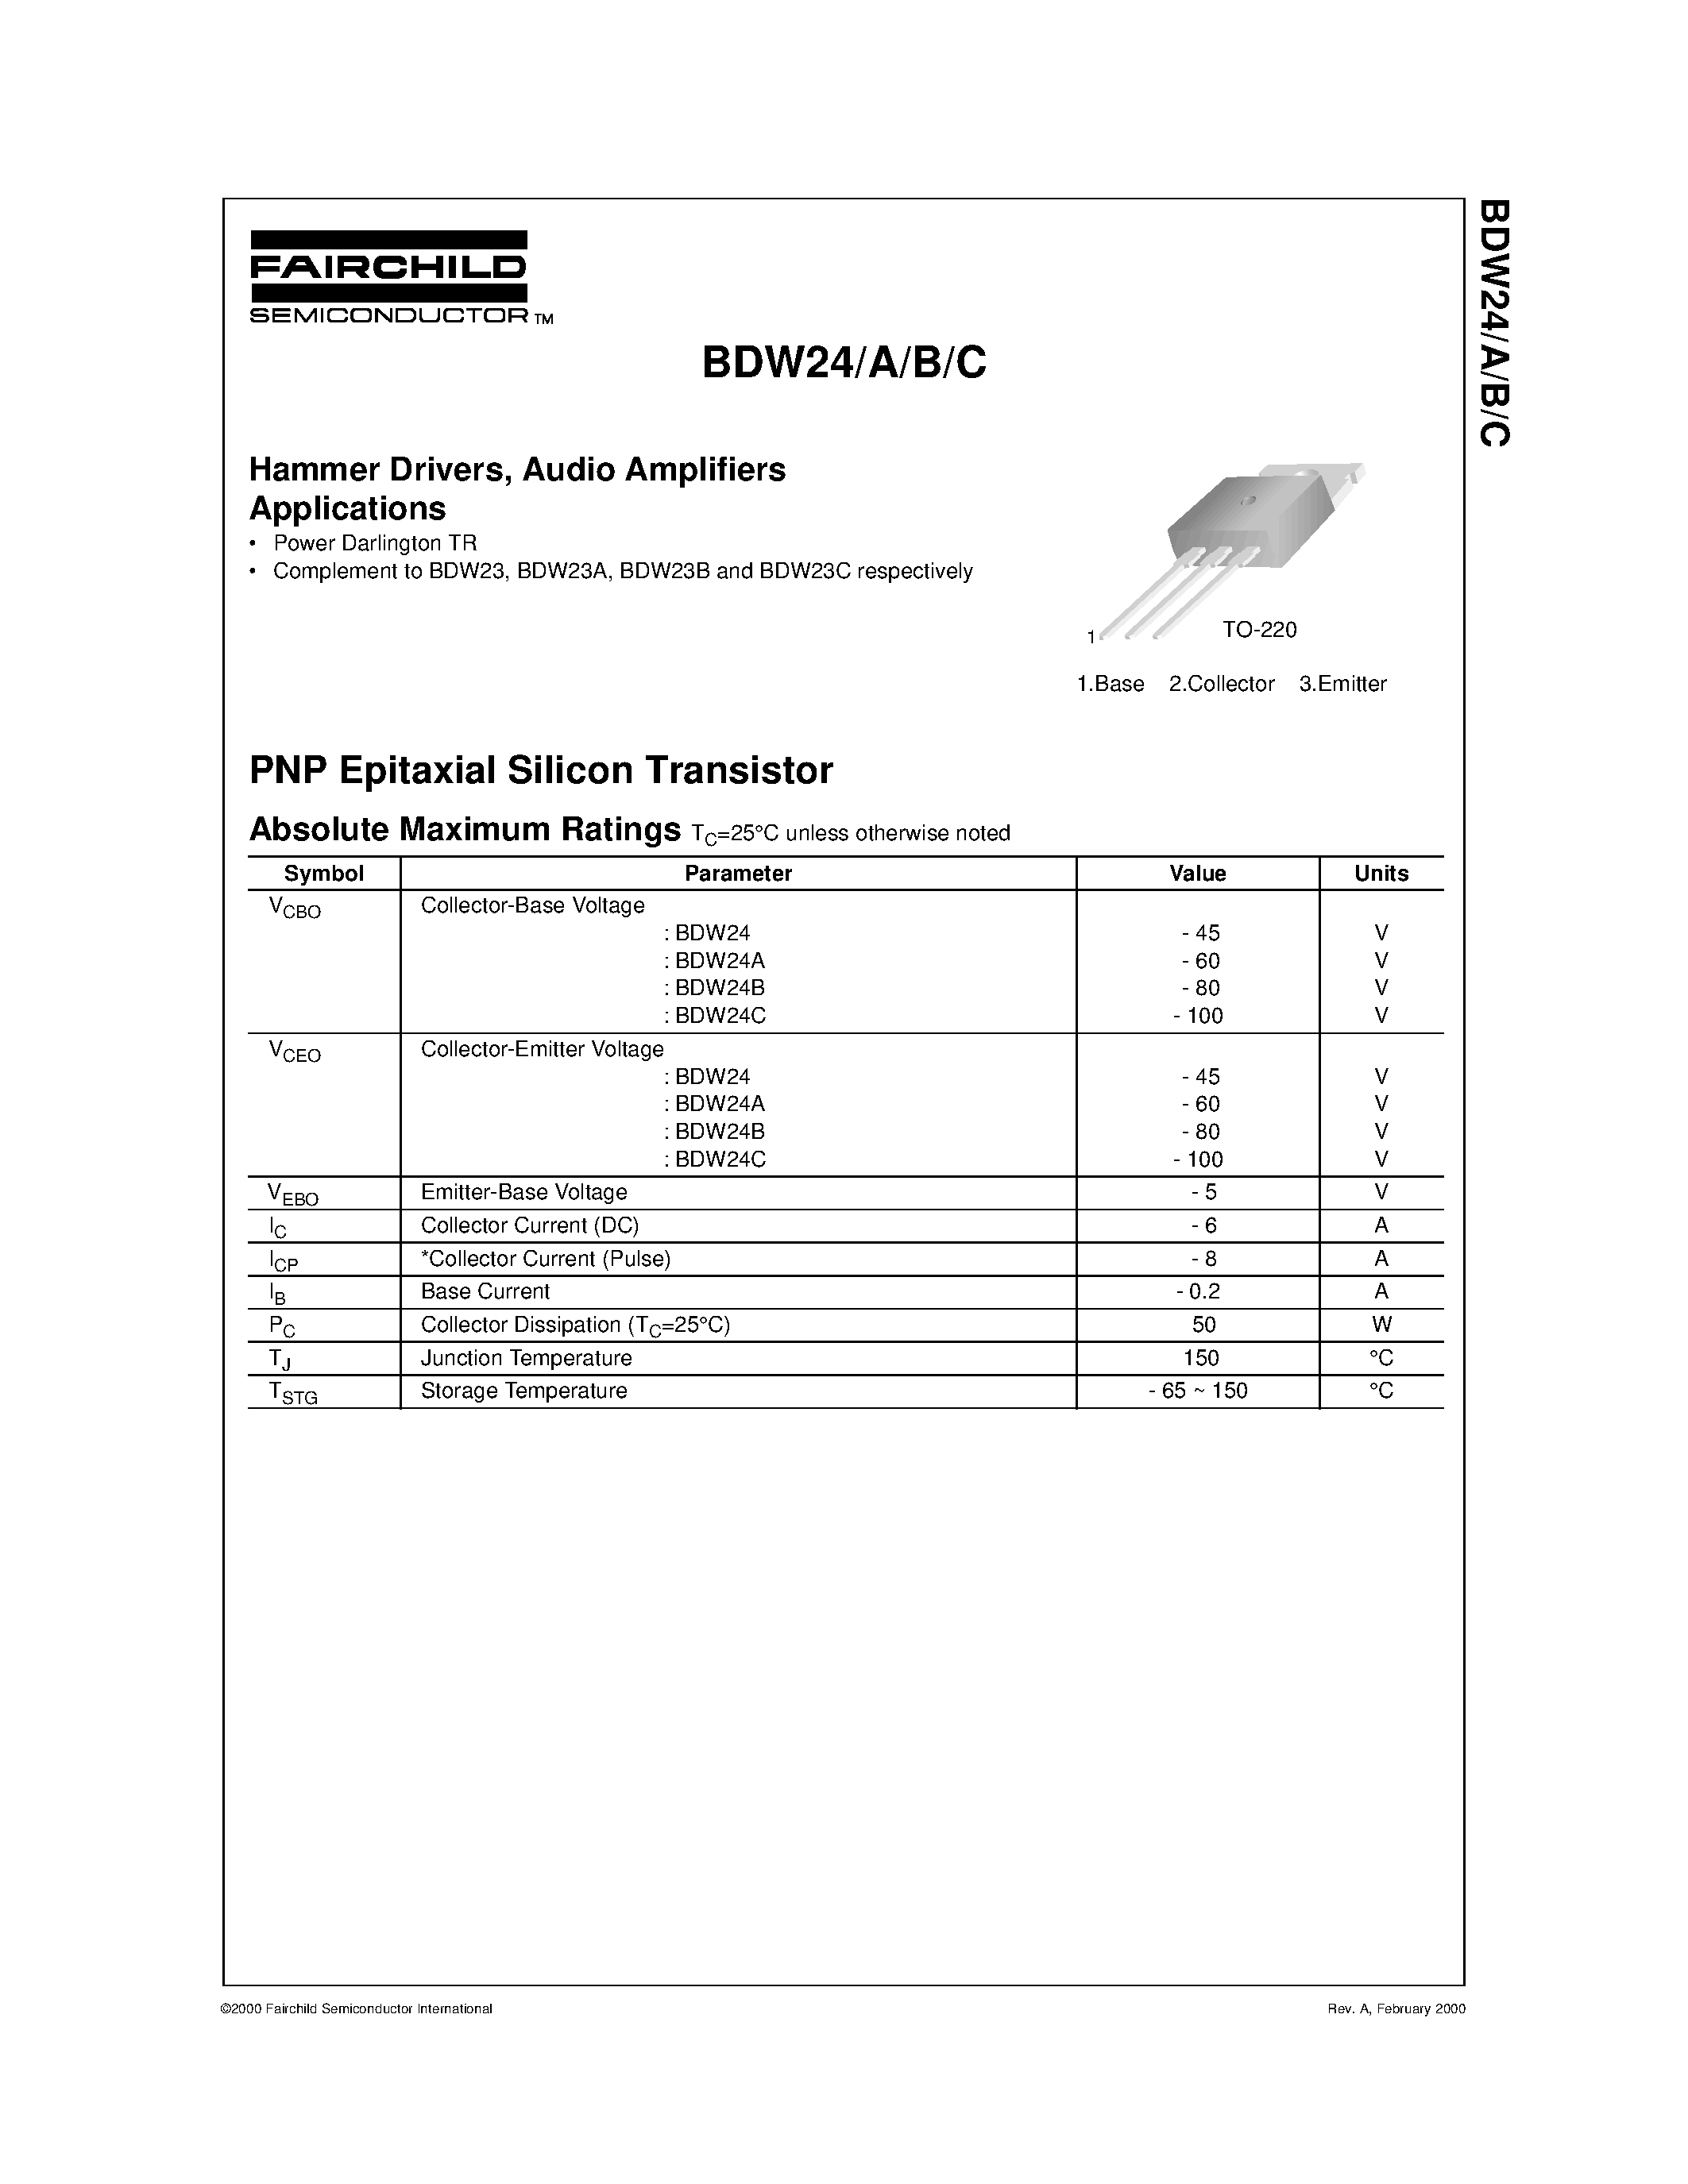 Datasheet BDW24A - Hammer Drivers/ Audio Amplifiers Applications page 1